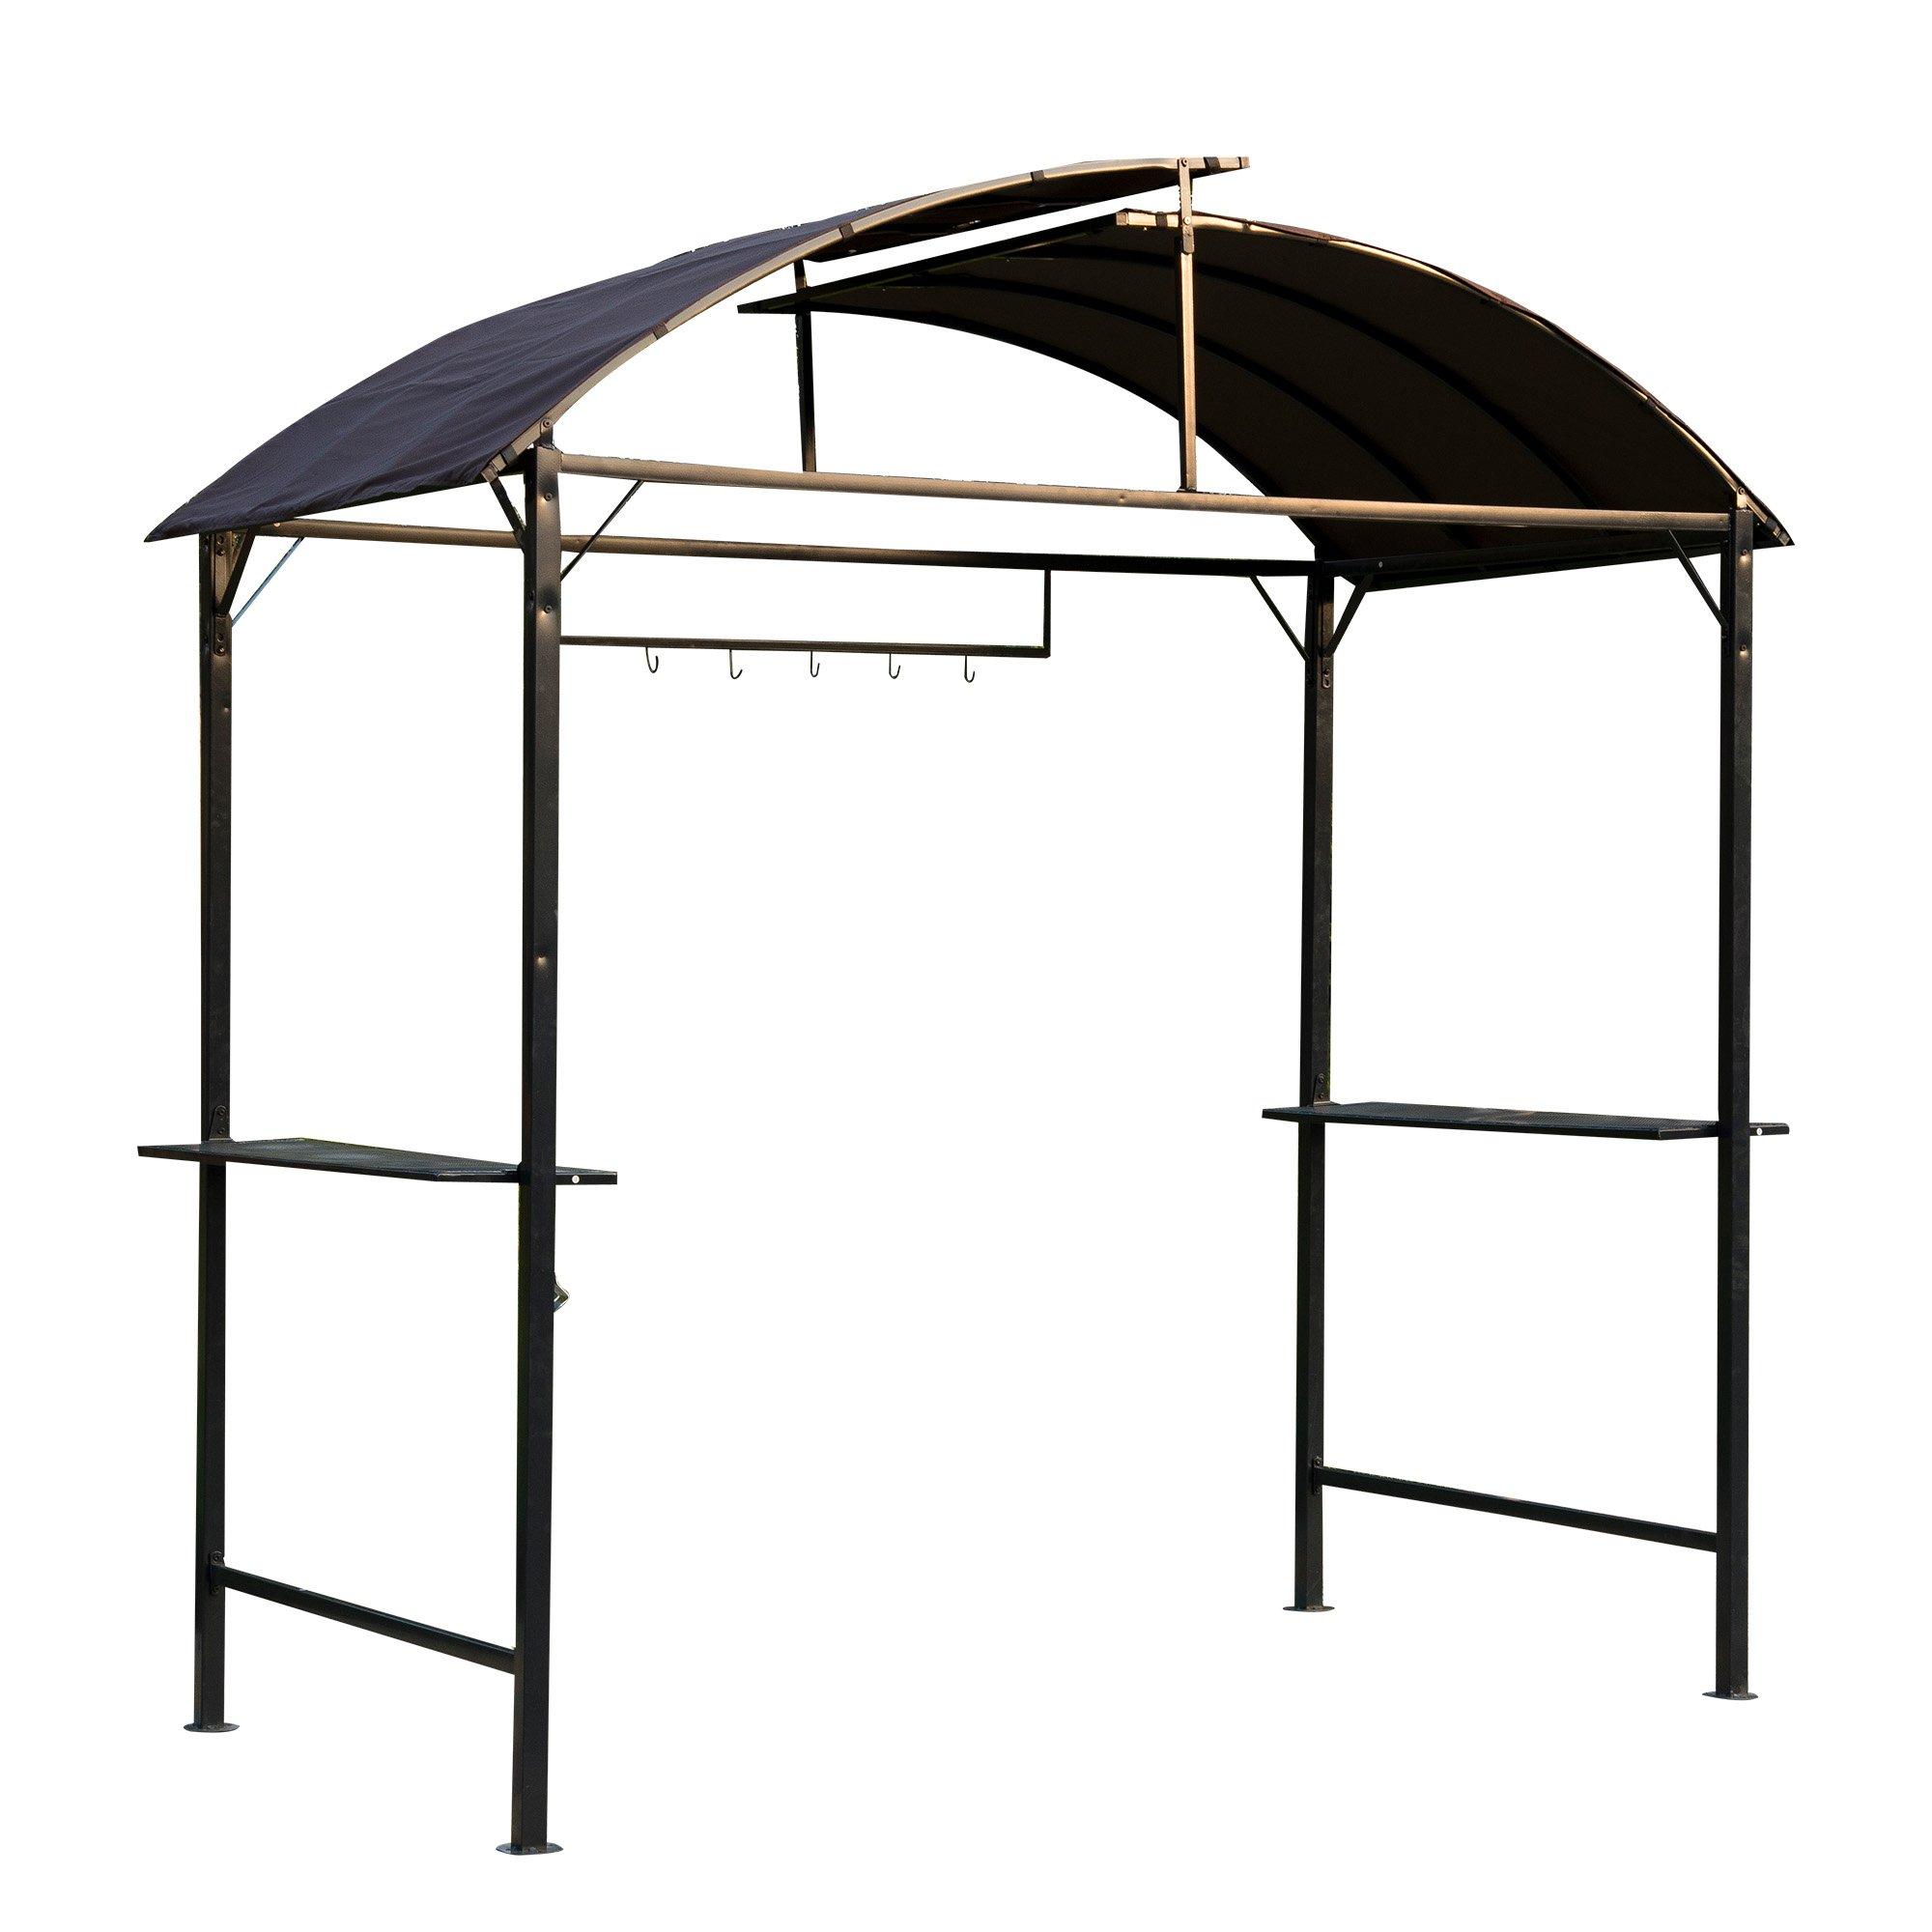 Gazebo Marquee Canopy Awning Shelter Garden Patio BBQ Tent Grill